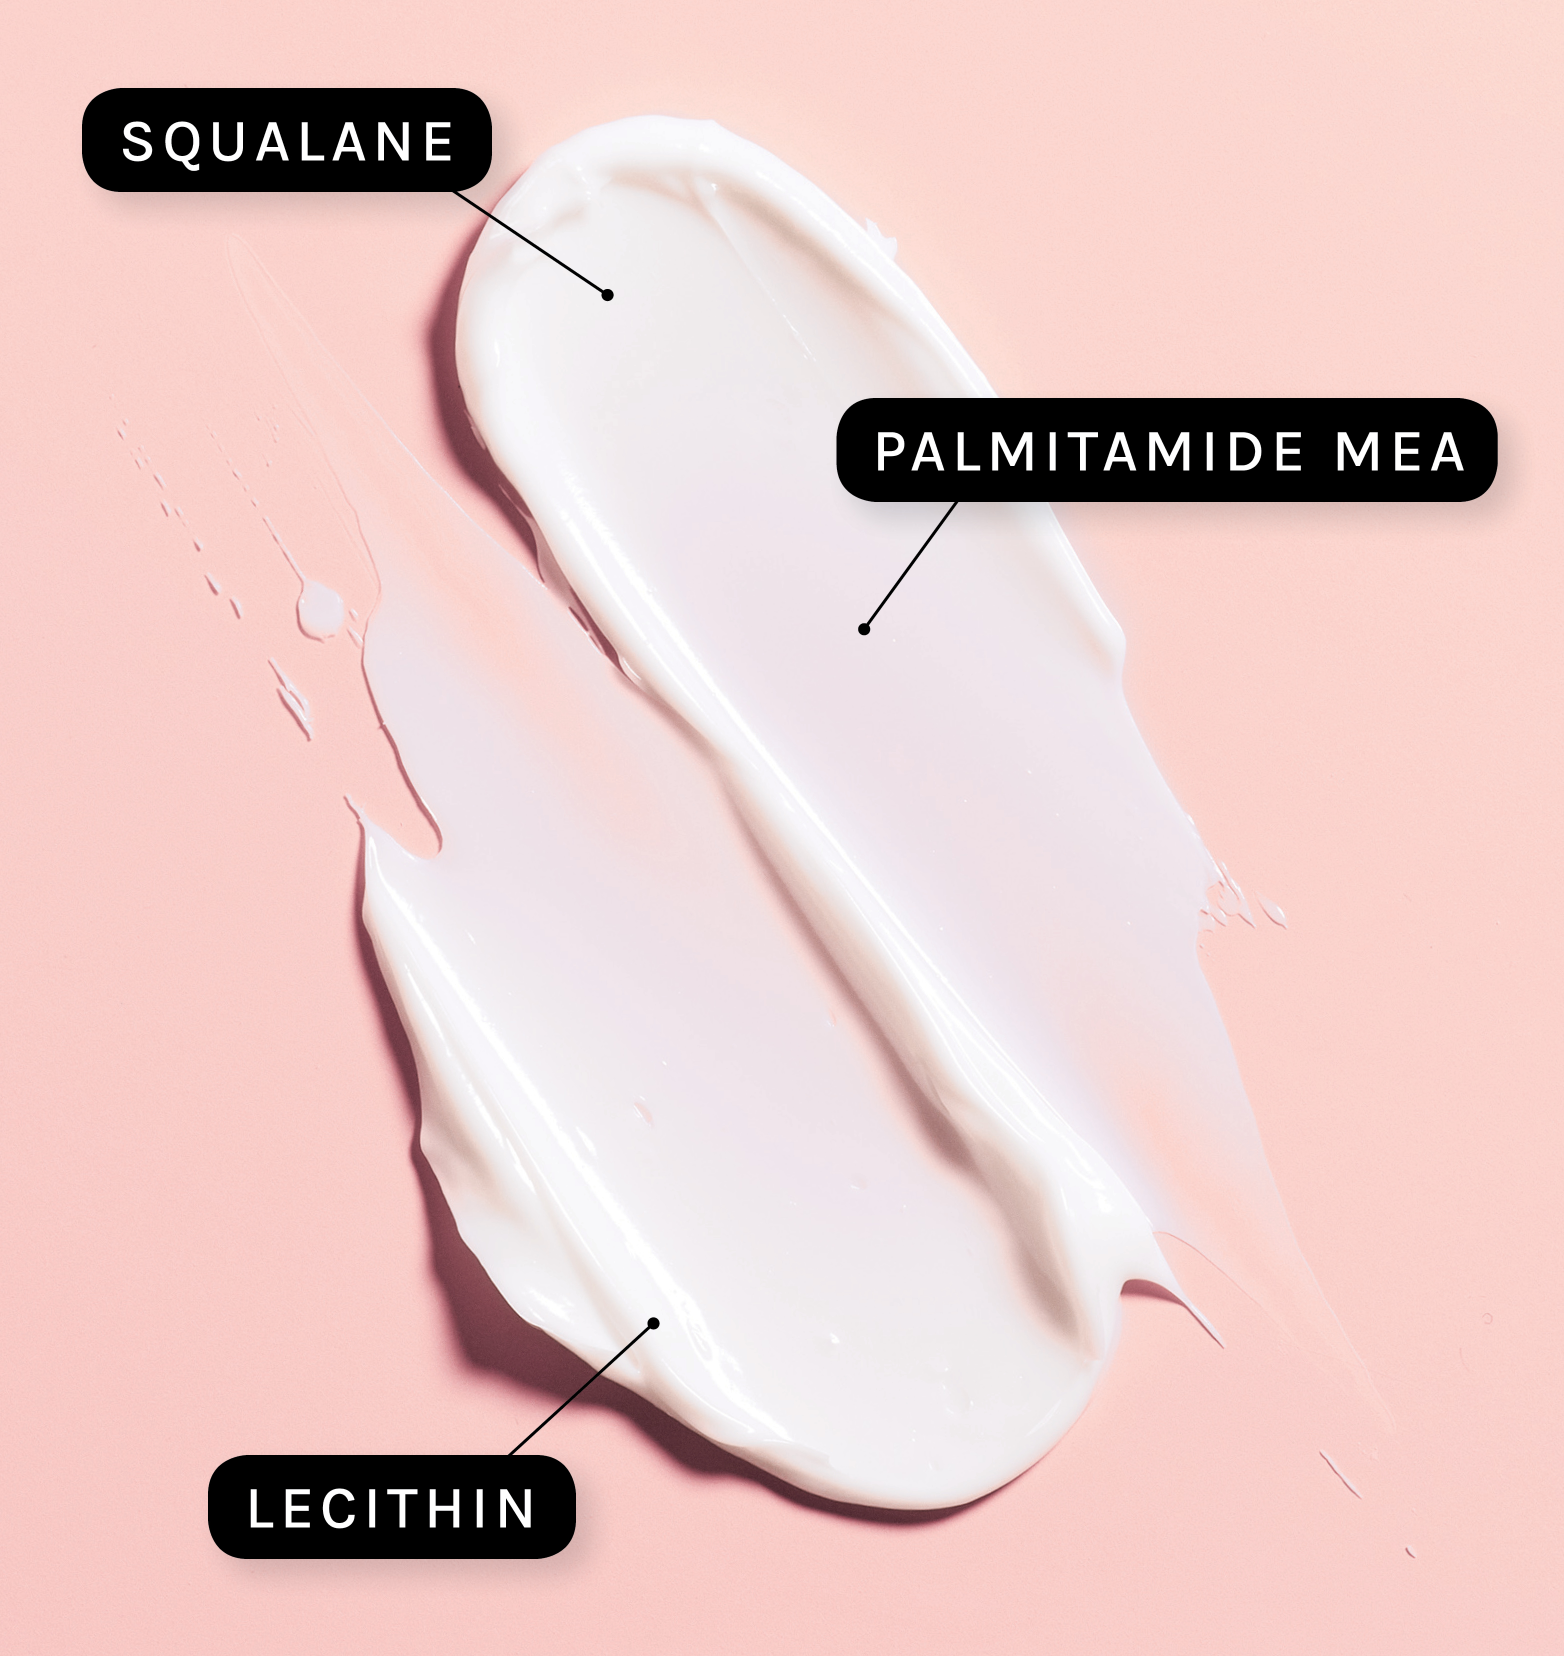 A white spread of Physiogel Calming Relief on a pink surface with three ingredients texts "squalane", "palmitamide mea", "lecithin"